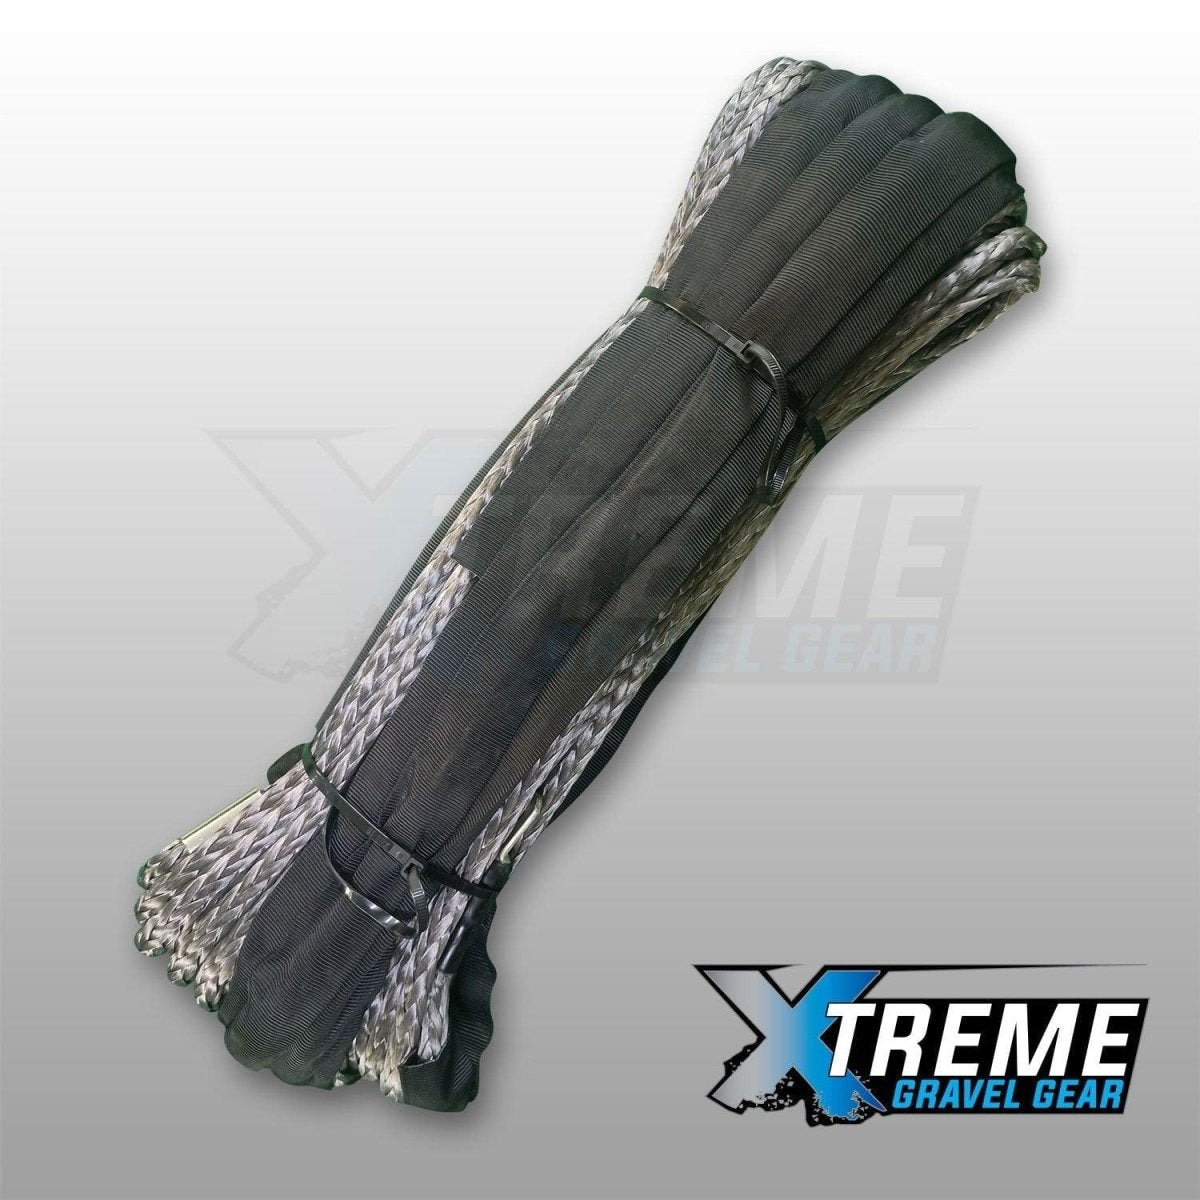 Xtreme Gravel Gear Synthetic Winch Rope 10mmx30m - 17500lbs Breaking Strength - NZ Offroader